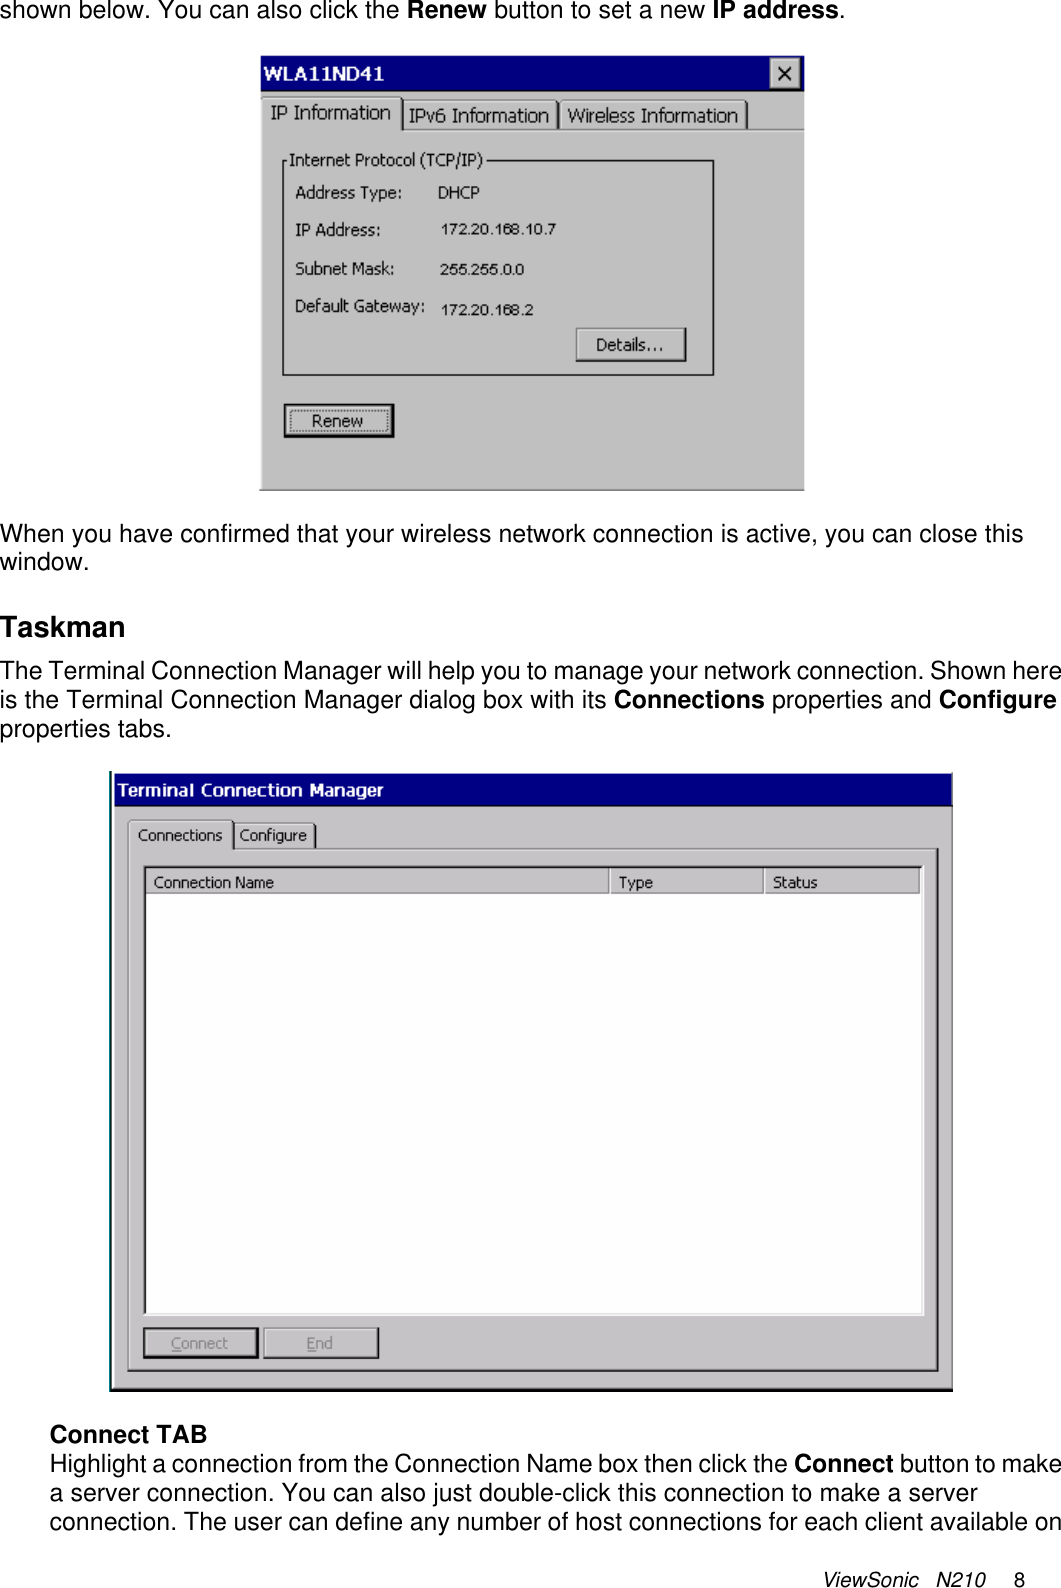 ViewSonic   N210     8 shown below. You can also click the Renew button to set a new IP address.    When you have confirmed that your wireless network connection is active, you can close this window.   Taskman The Terminal Connection Manager will help you to manage your network connection. Shown here is the Terminal Connection Manager dialog box with its Connections properties and Configure properties tabs.    Connect TAB Highlight a connection from the Connection Name box then click the Connect button to make a server connection. You can also just double-click this connection to make a server connection. The user can define any number of host connections for each client available on 